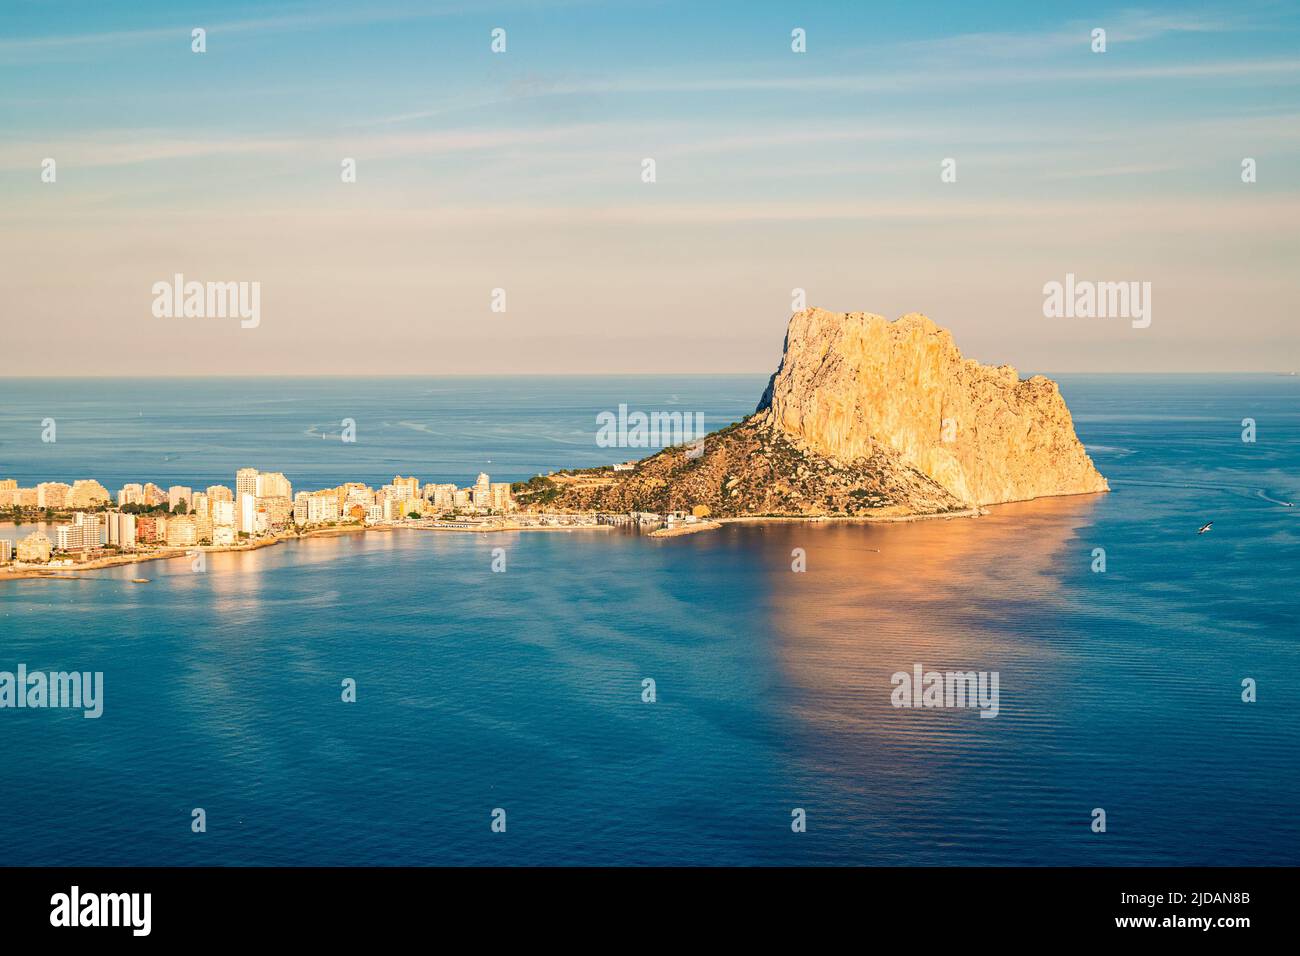 Peon d'Ifach aka Calpe Rock on Costa Blanca, Spain one of the most famous landmarks along the Costa Blanca coastline. Stock Photo